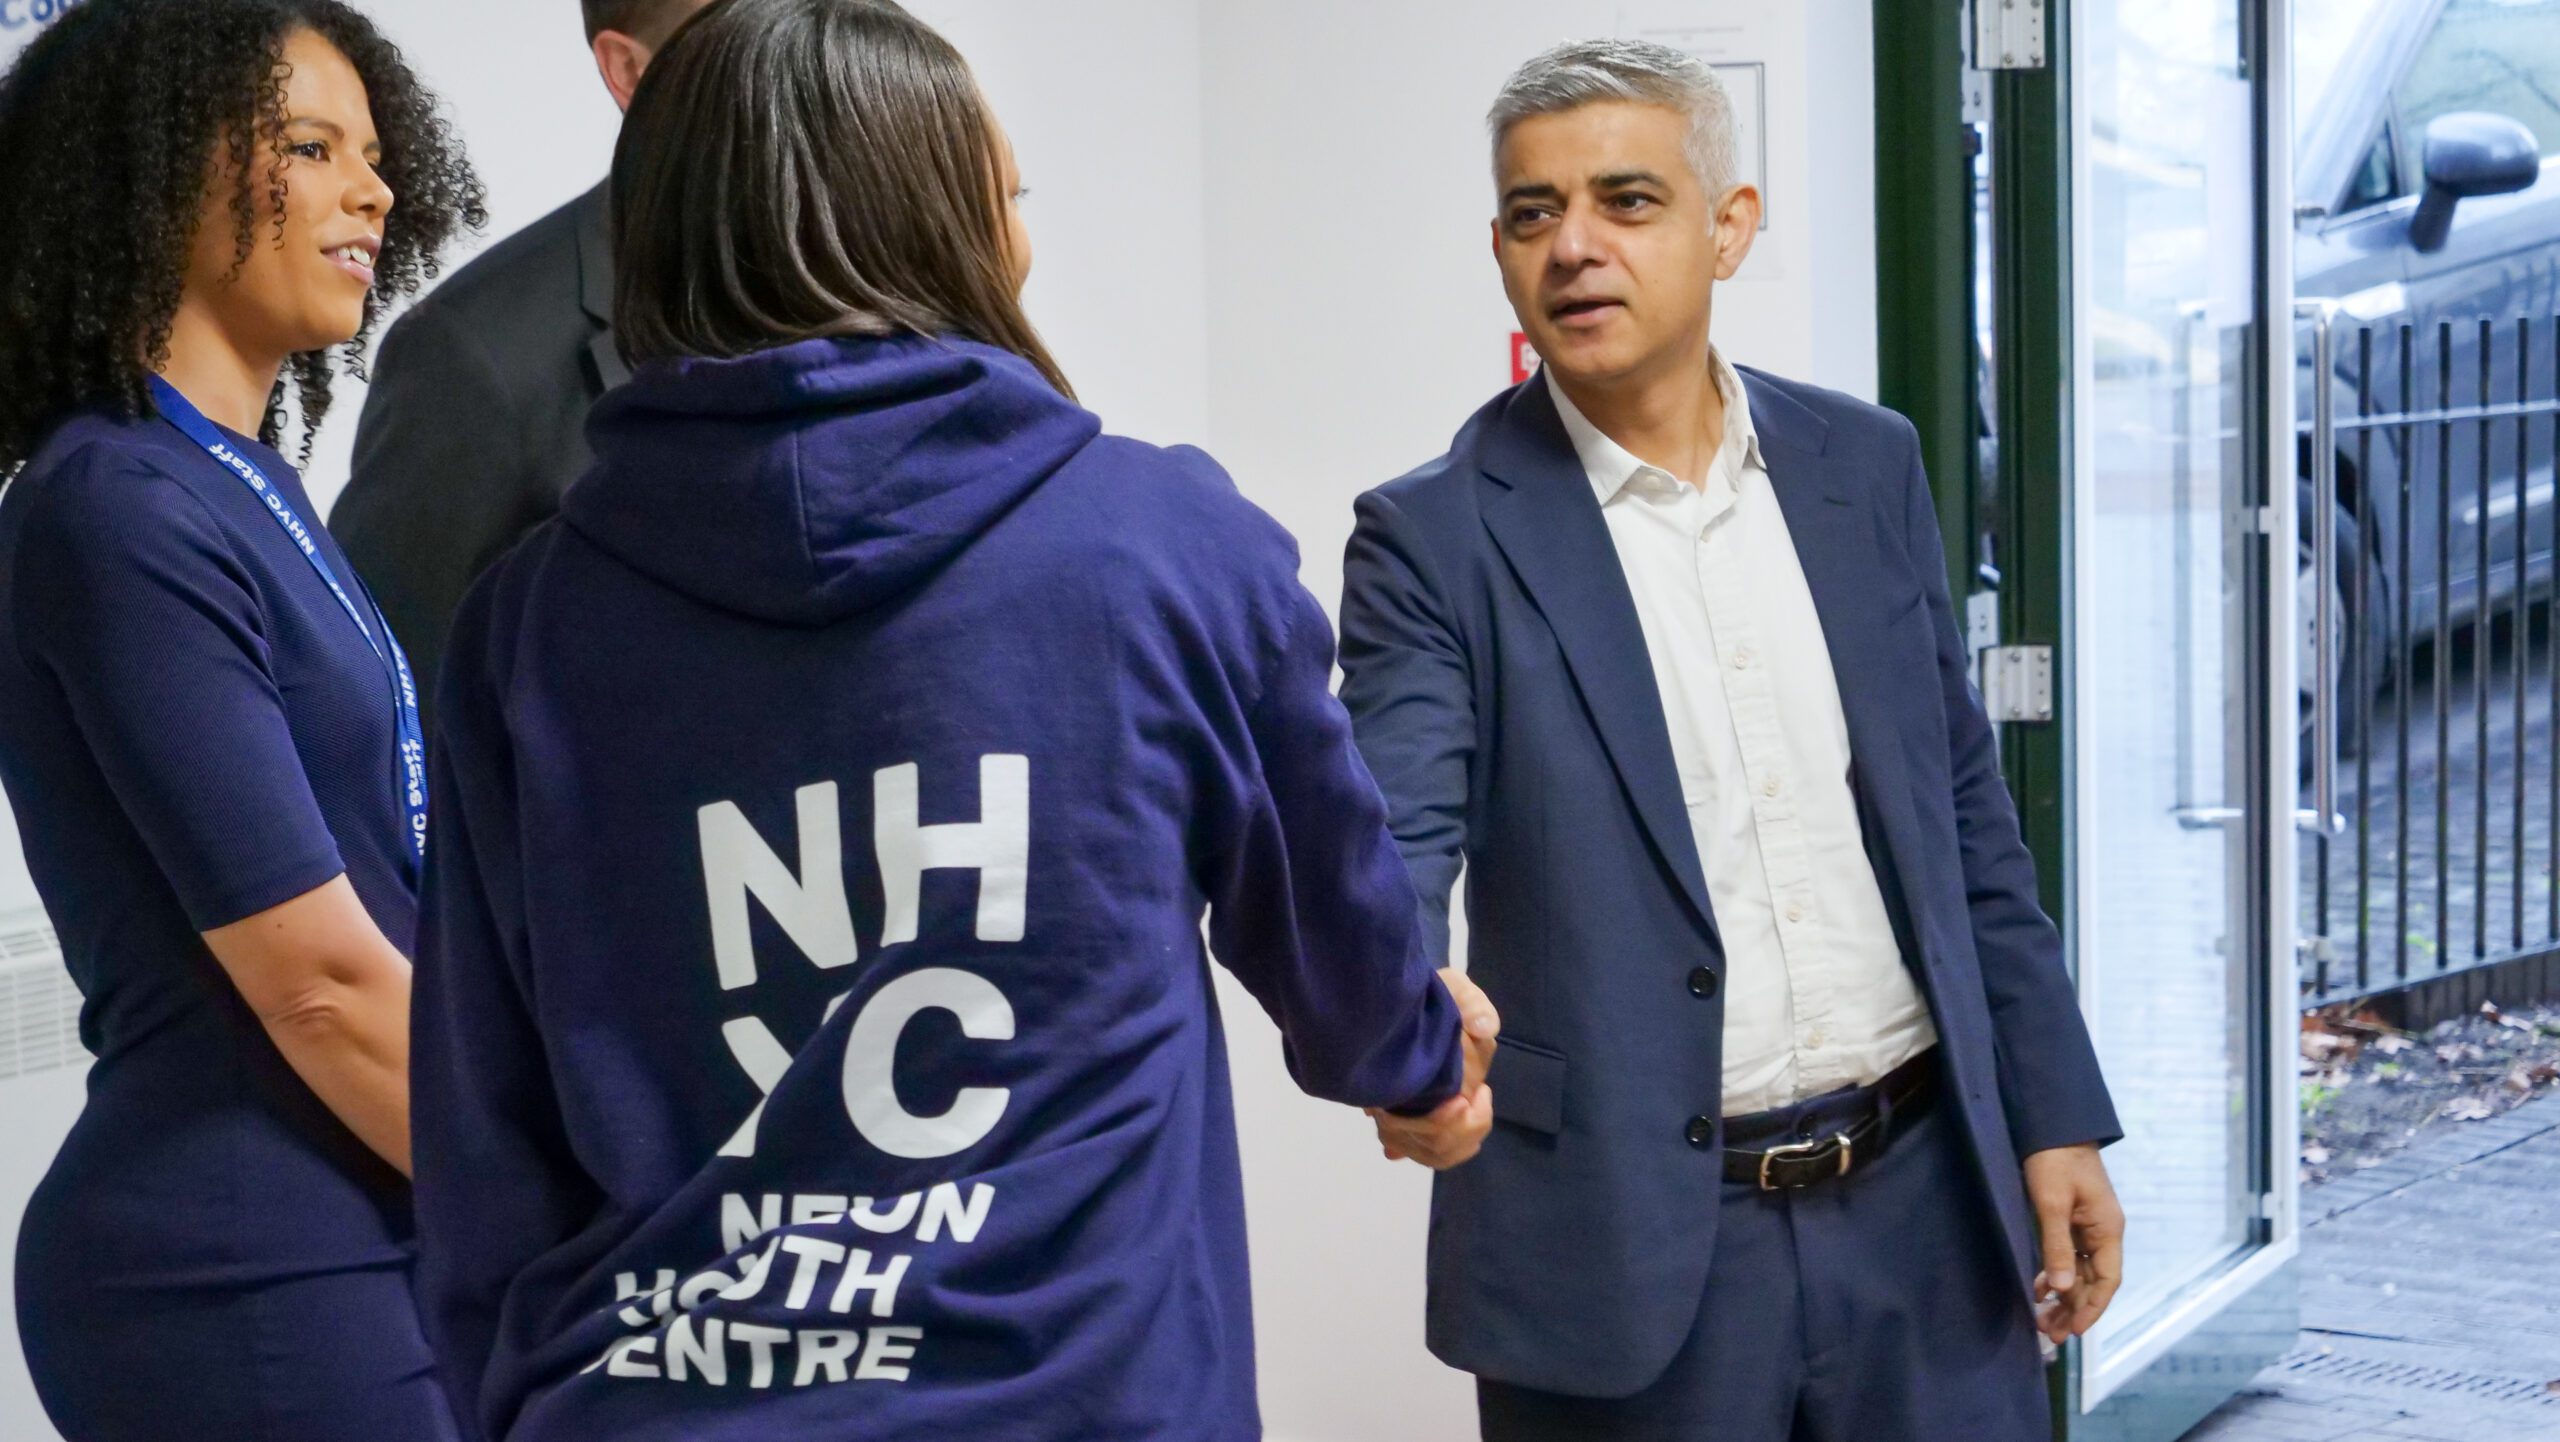 A photograph of the Mayor of London, Sadiq Khan, shaking hands with a New Horizon staff member